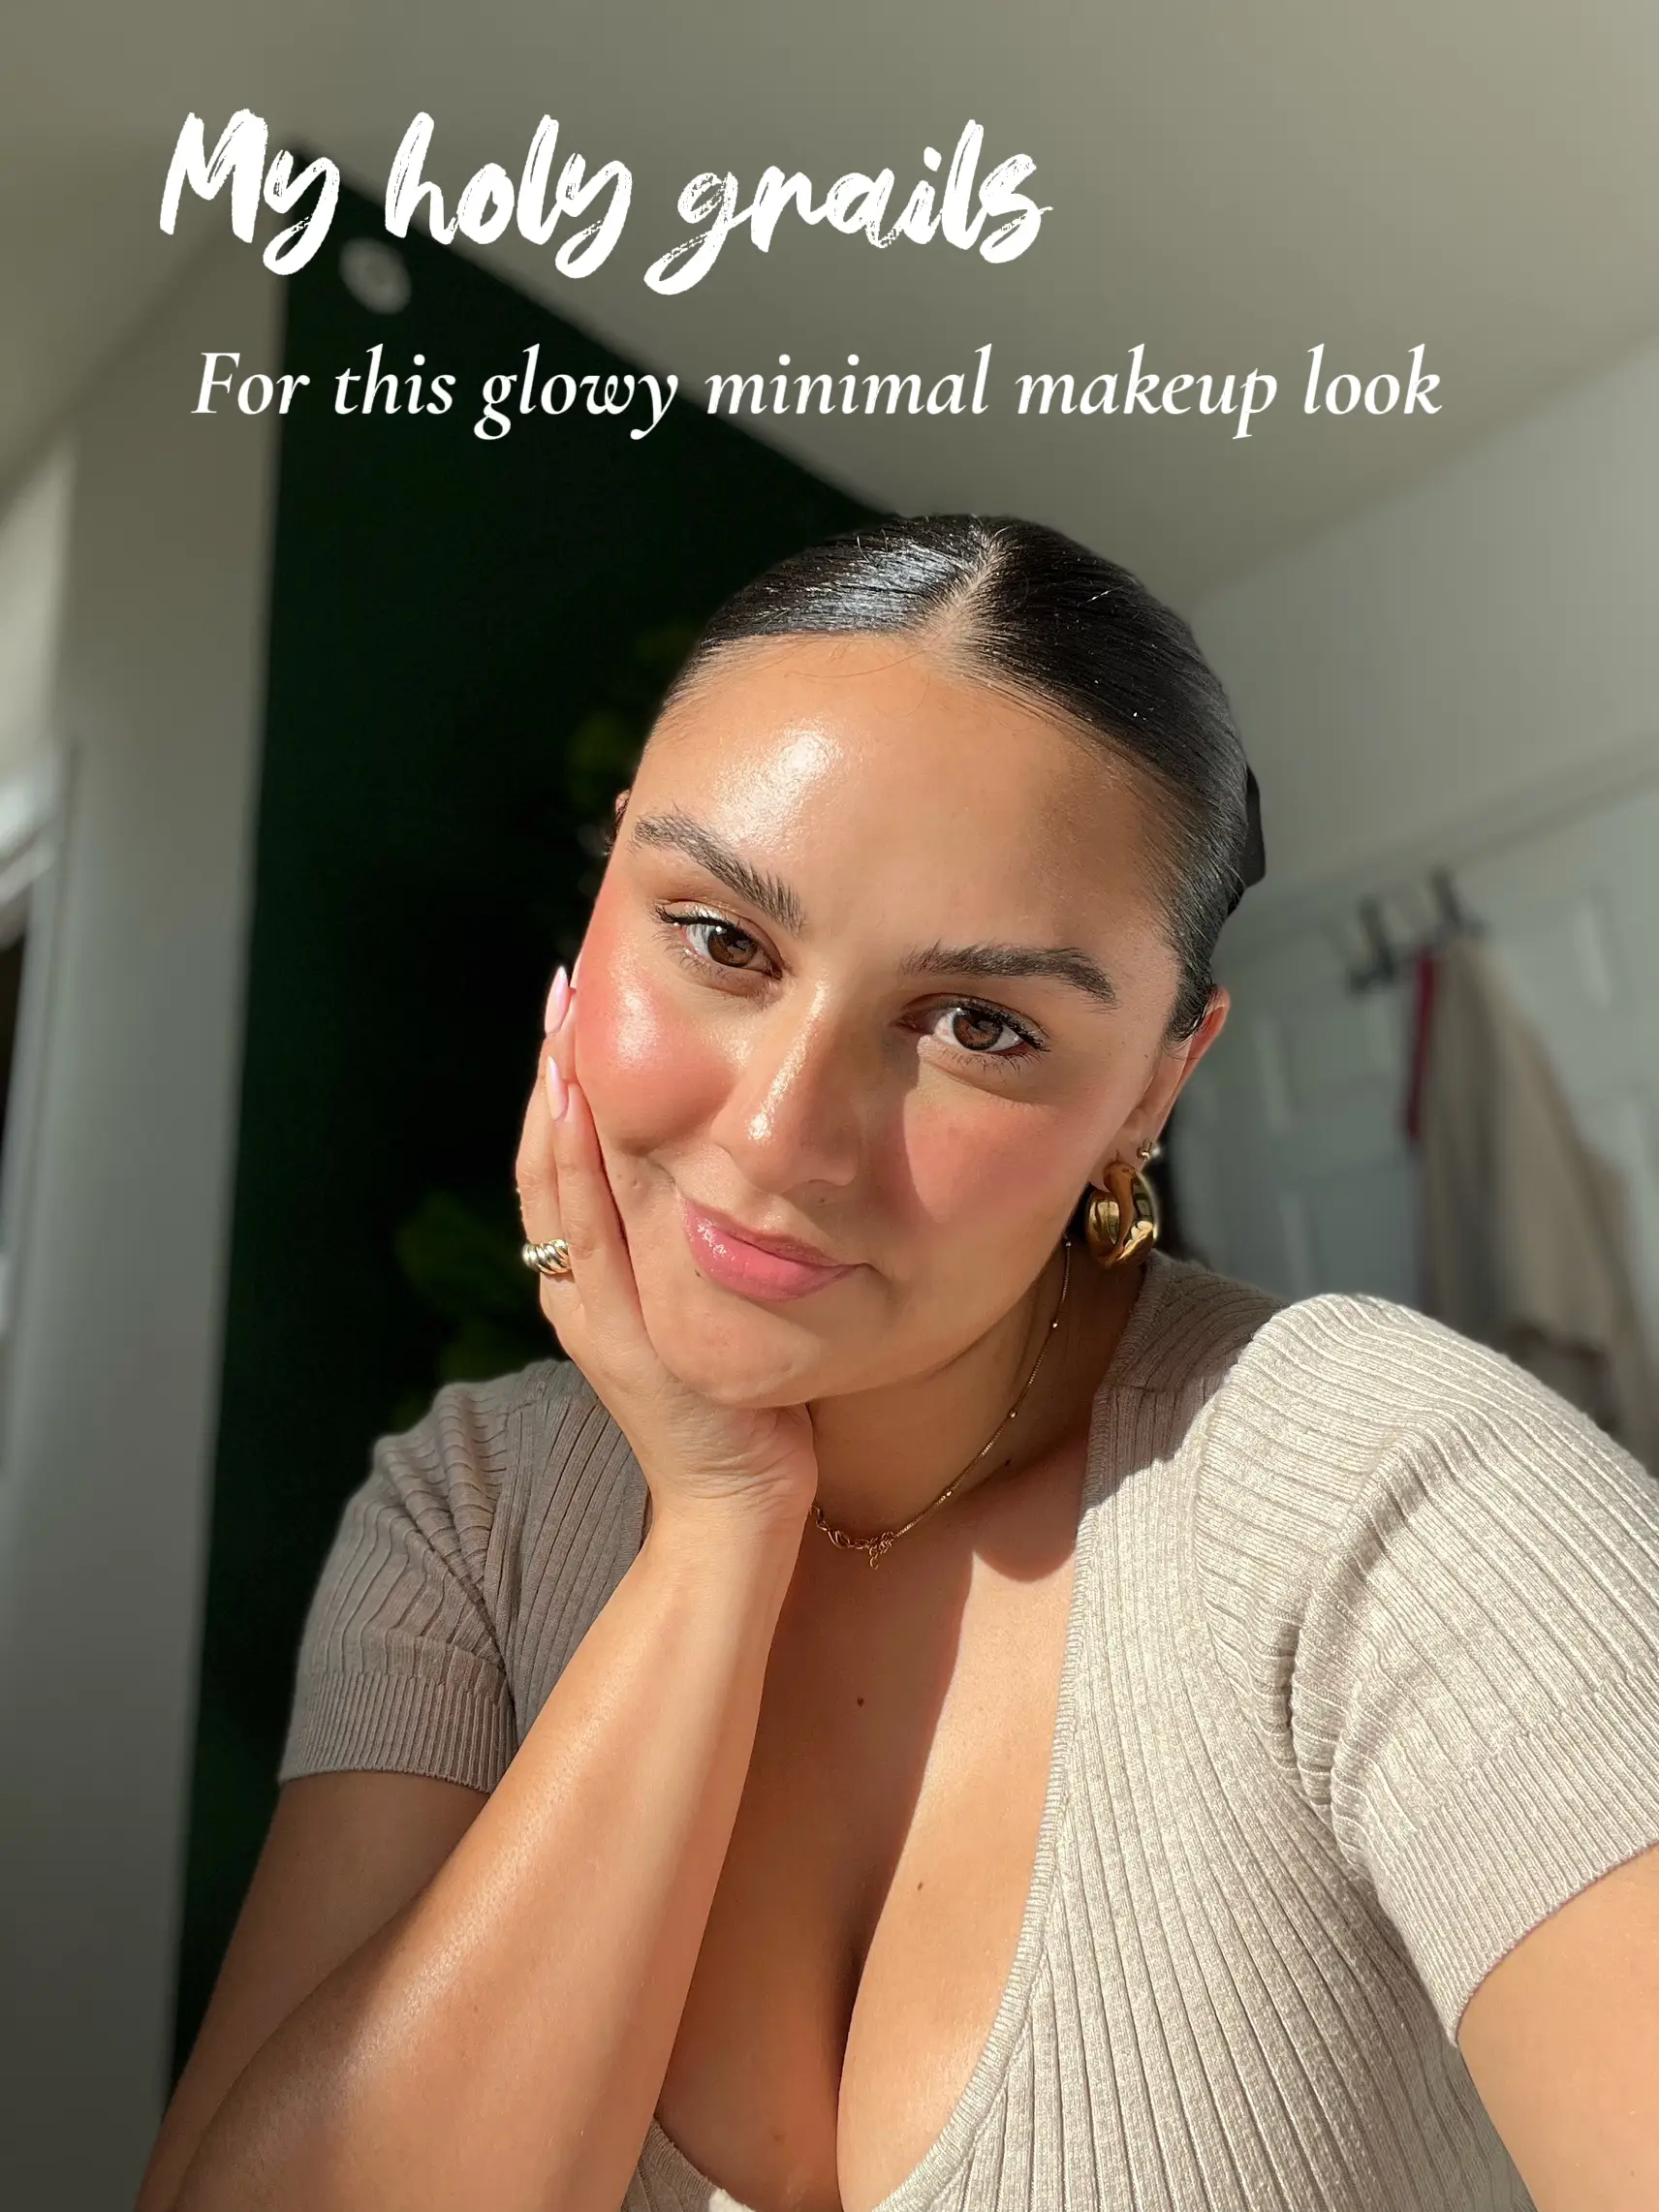 Simple Glow Makeup Tutorial 💋✨, Gallery posted by Sydney Turner